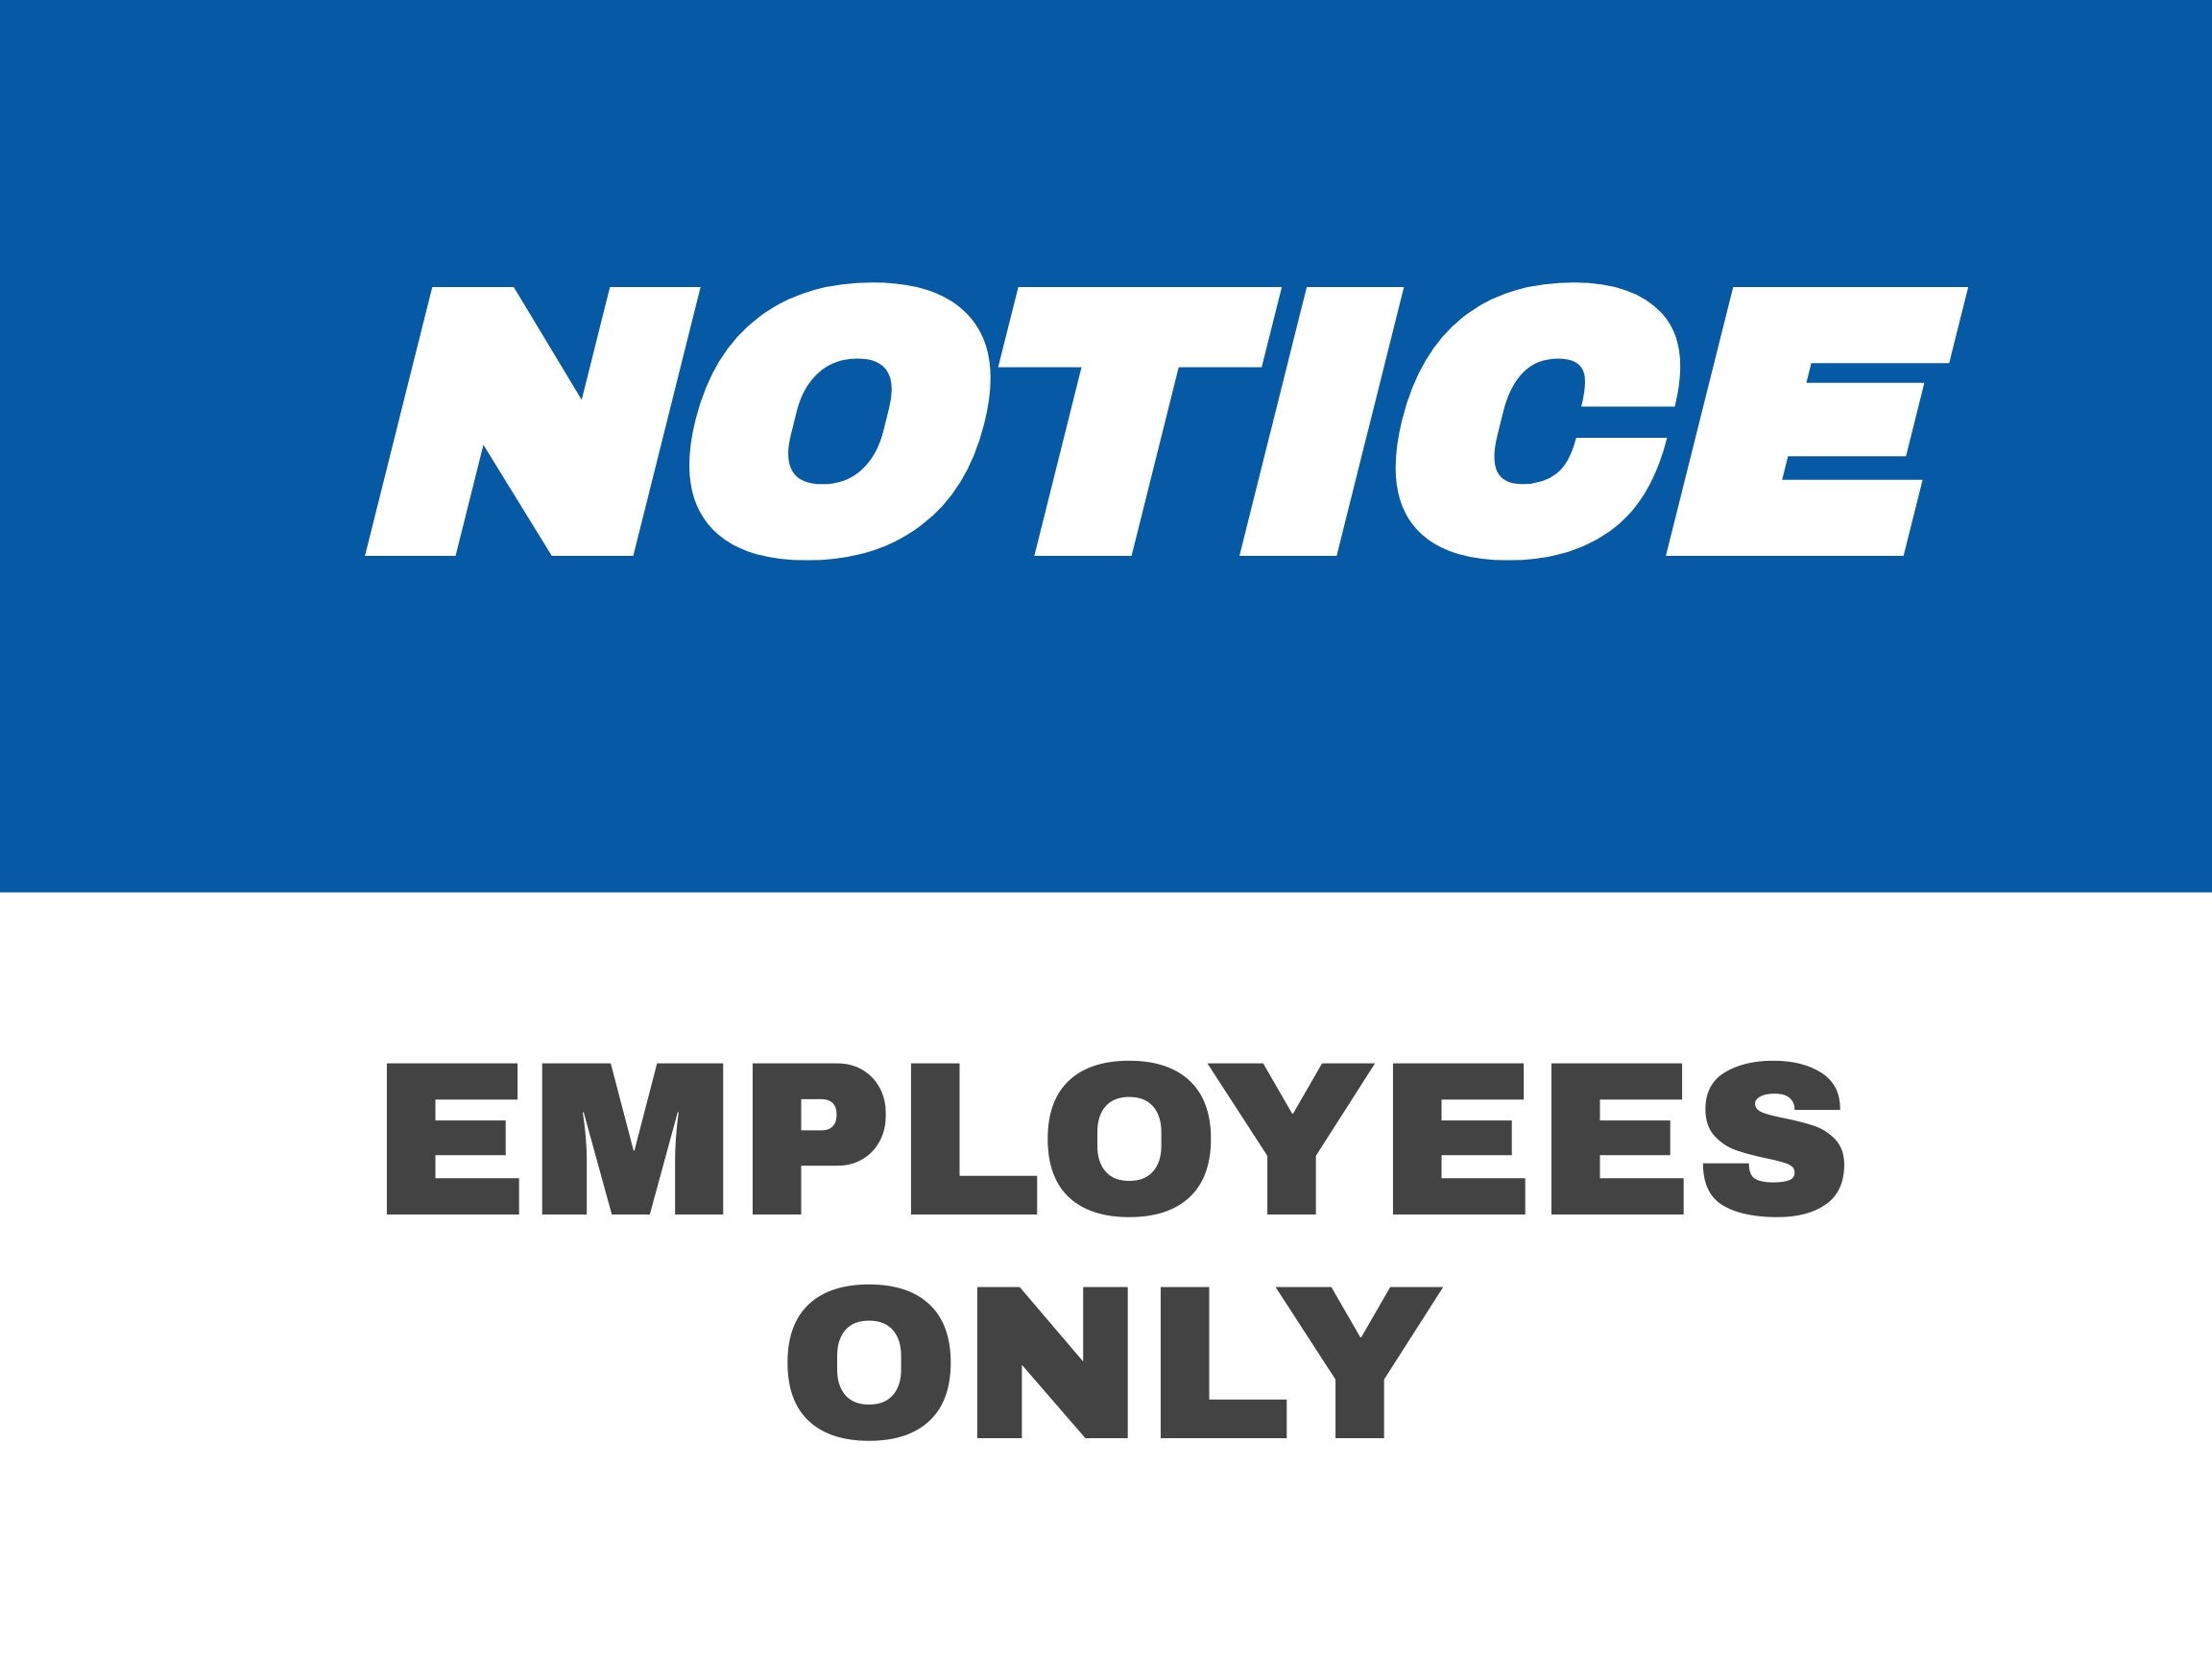 Free Workplace Sign Template.jpe